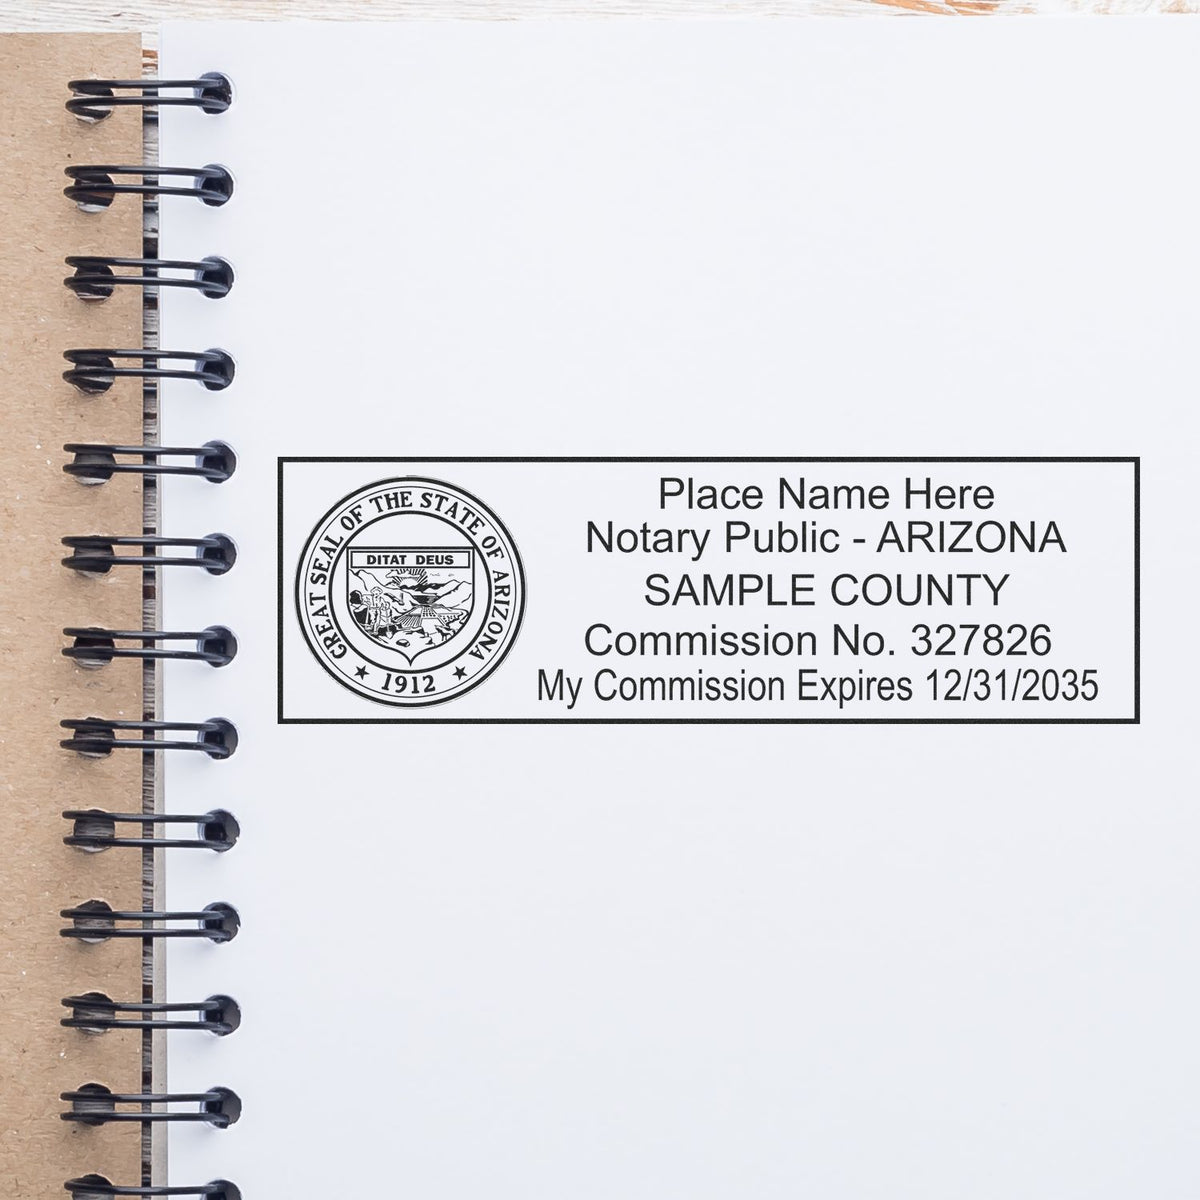 A lifestyle photo showing a stamped image of the Heavy-Duty Arizona Rectangular Notary Stamp on a piece of paper